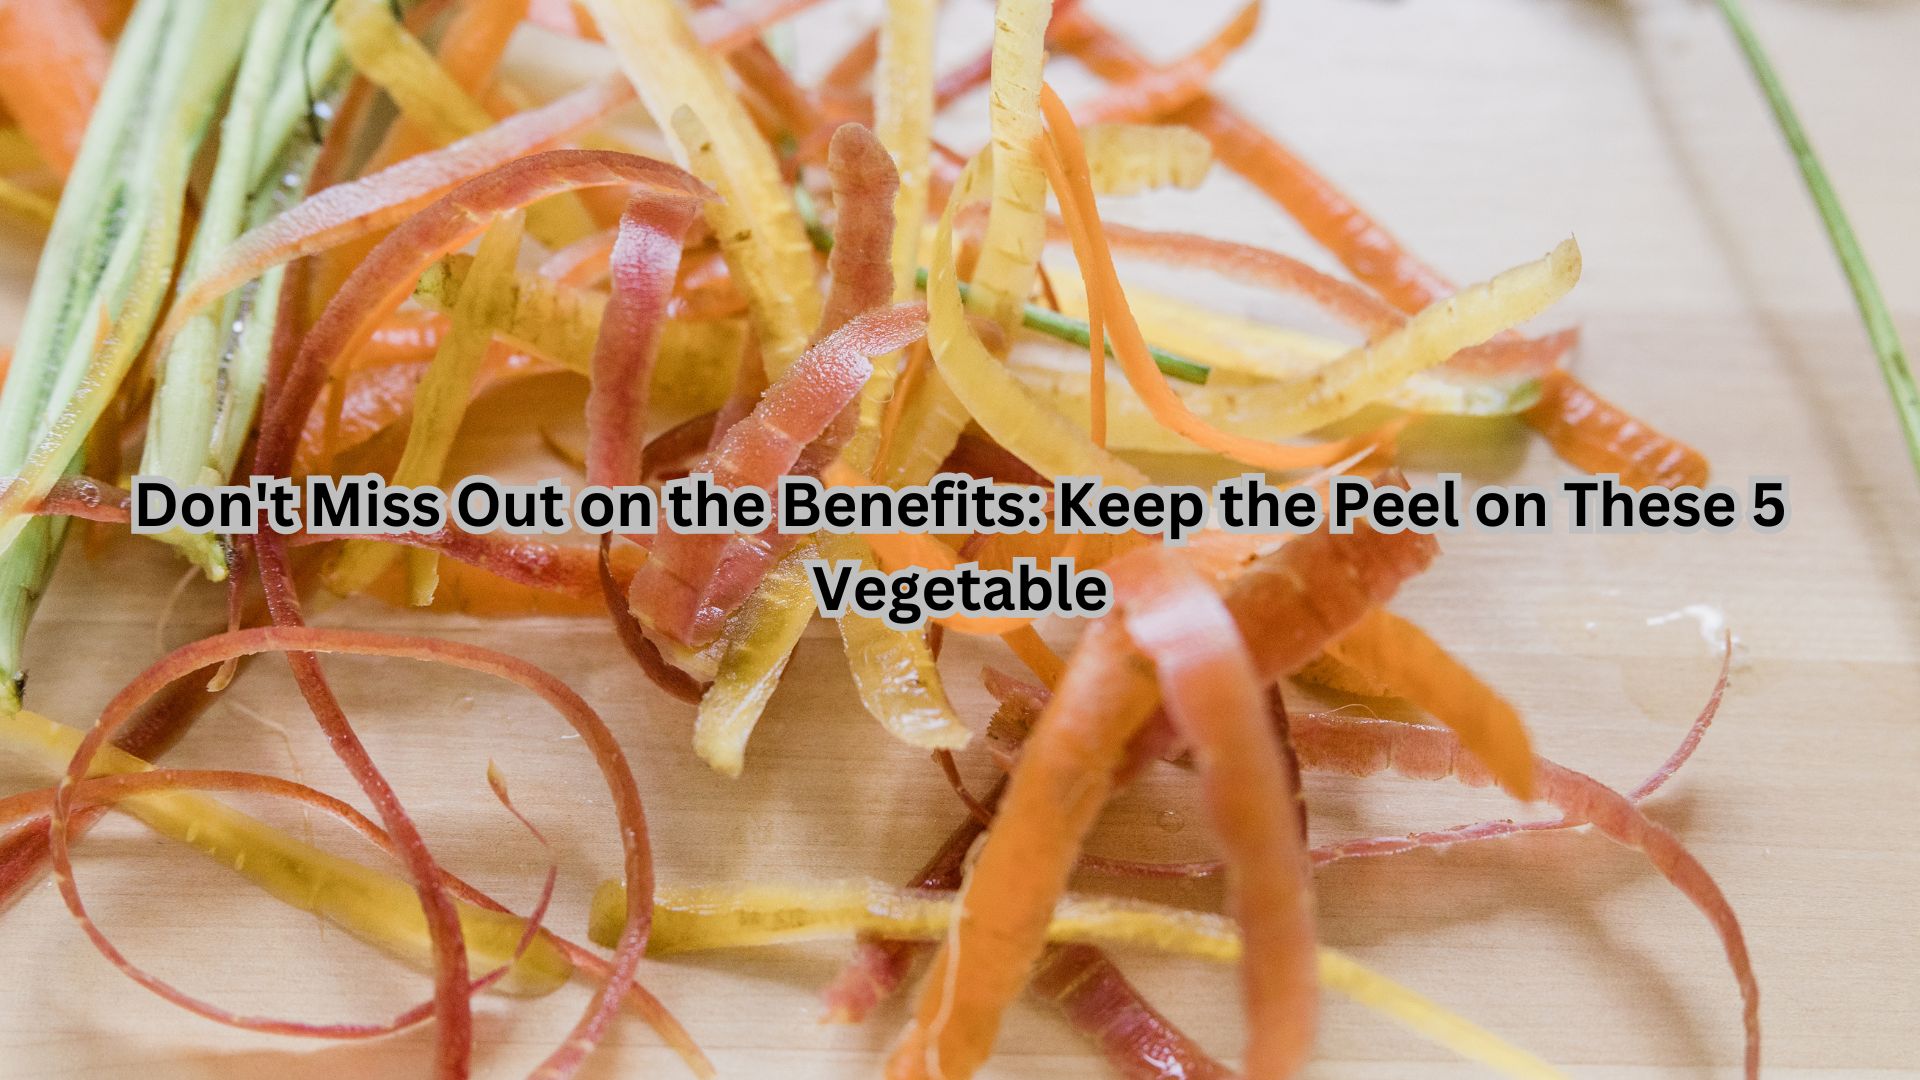 Don't Miss Out on the Benefits: Keep the Peel on These 5 Vegetables